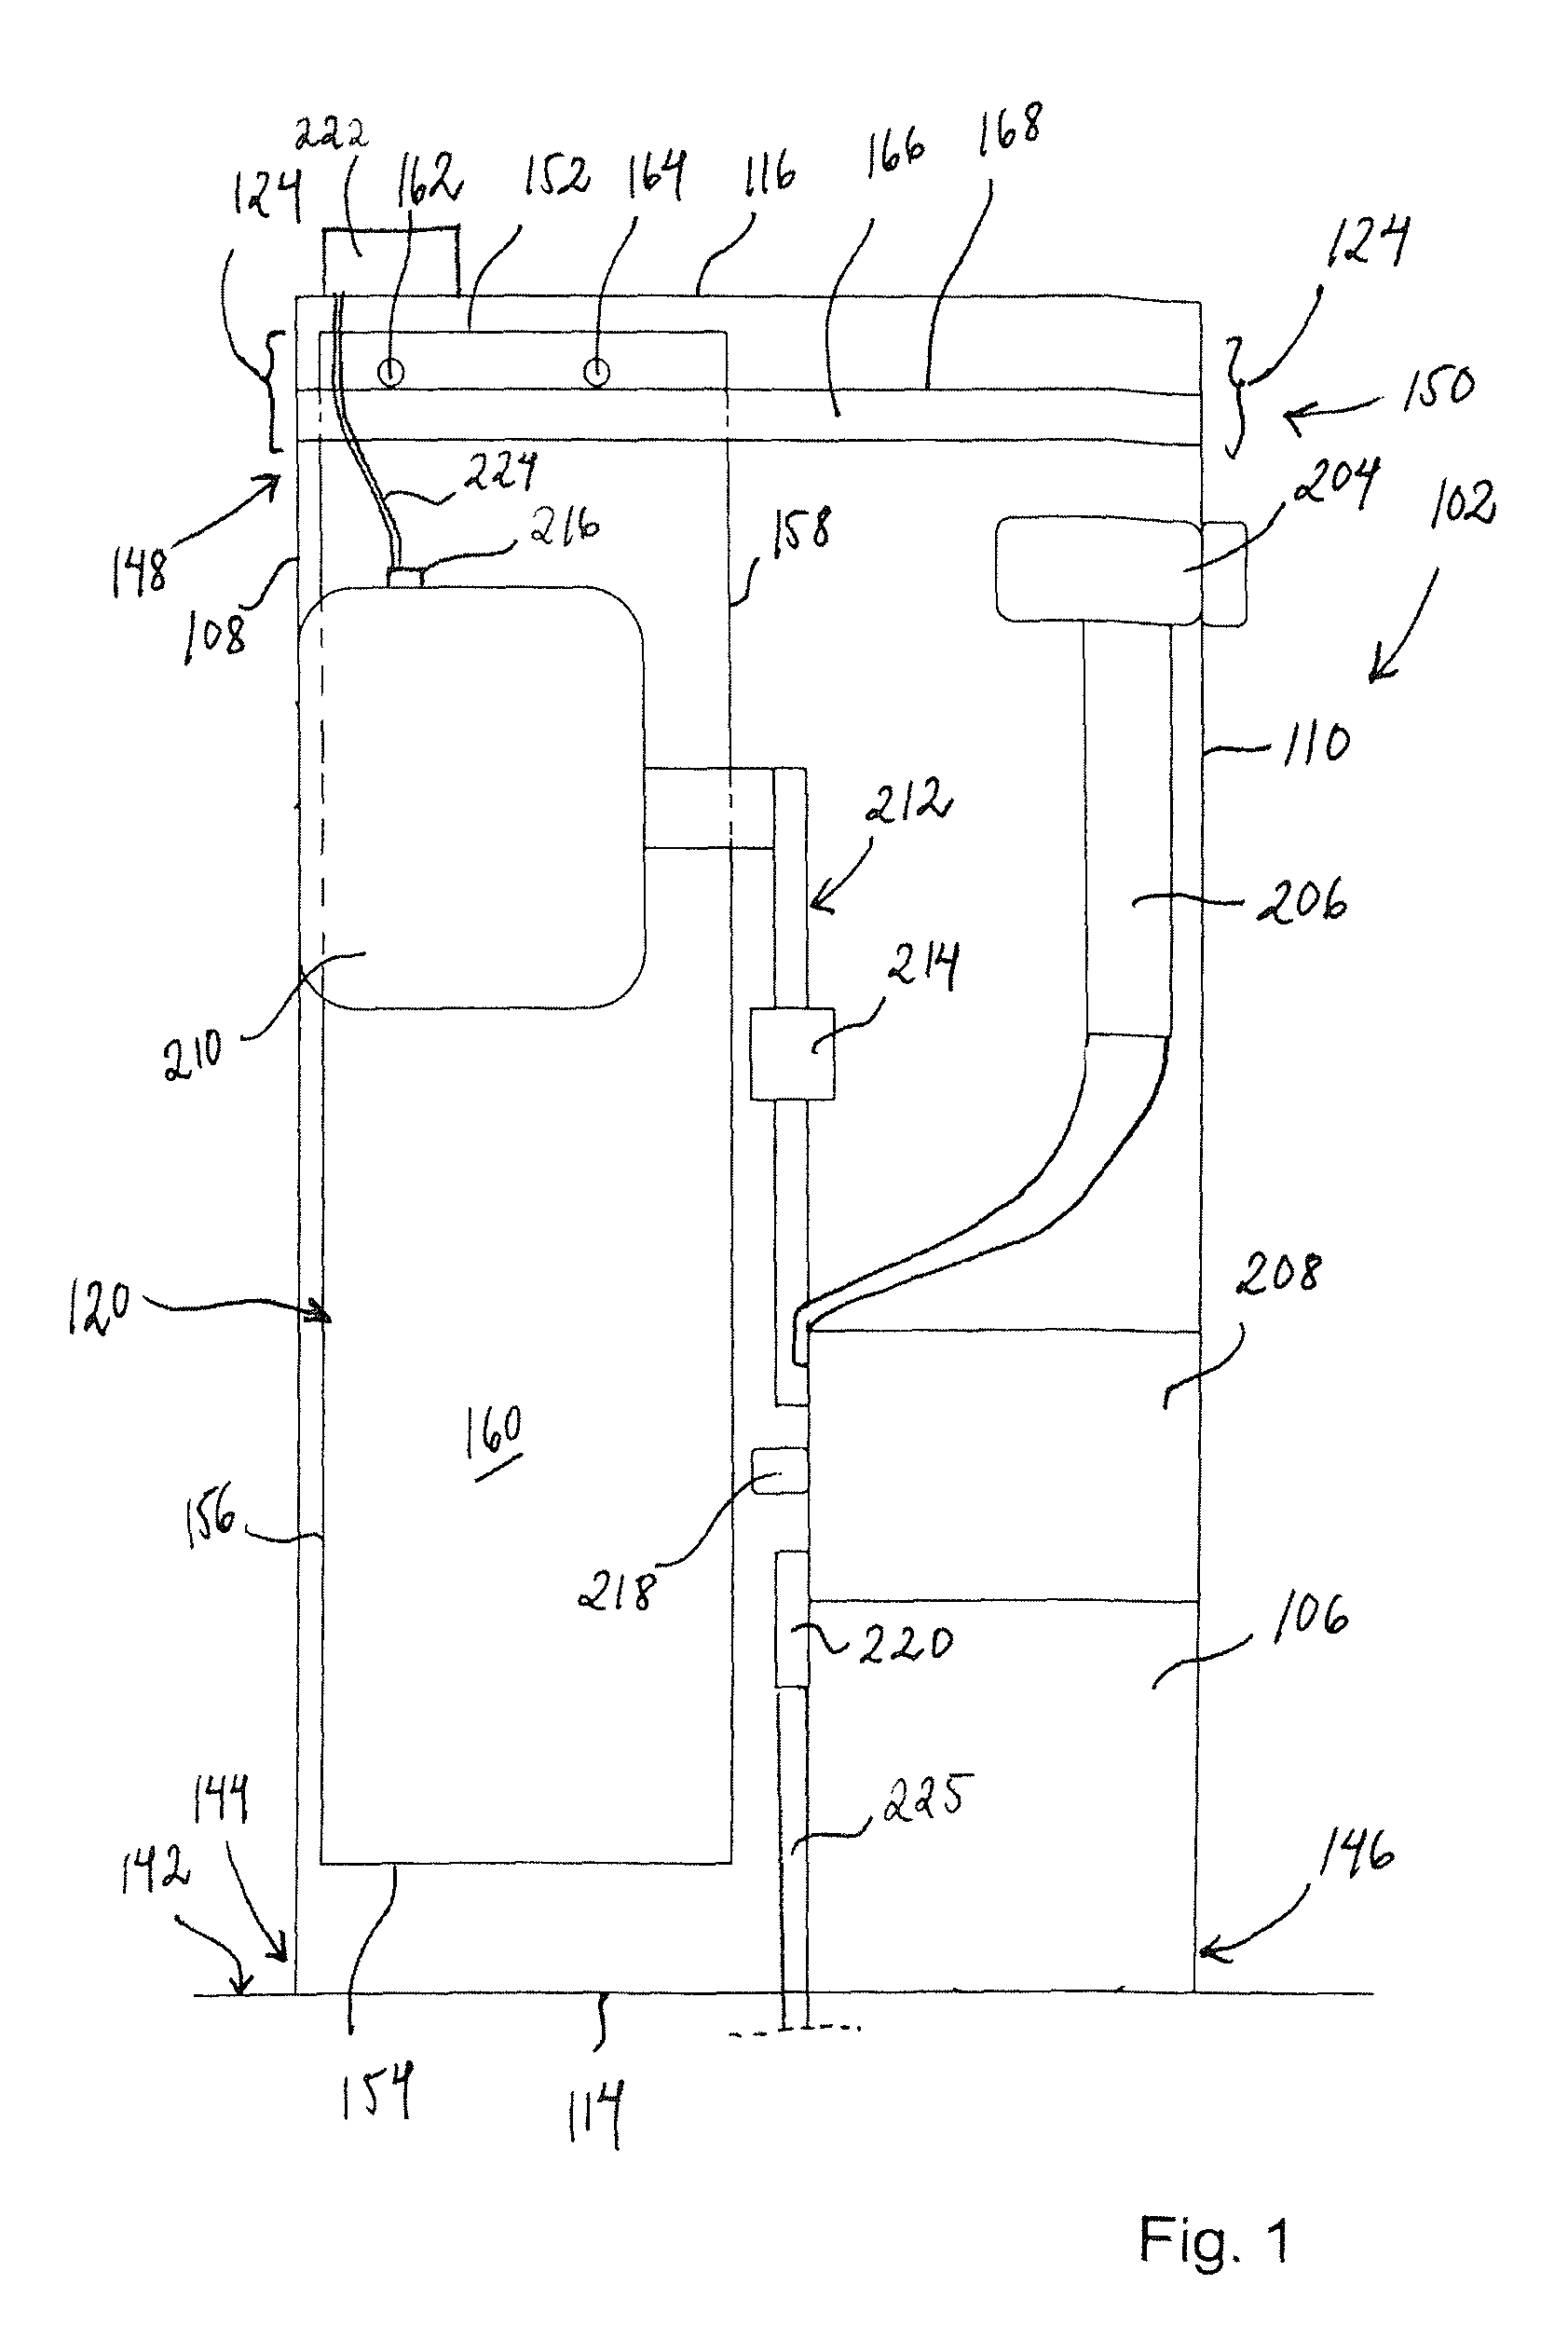 Apparatus for electric power distribution